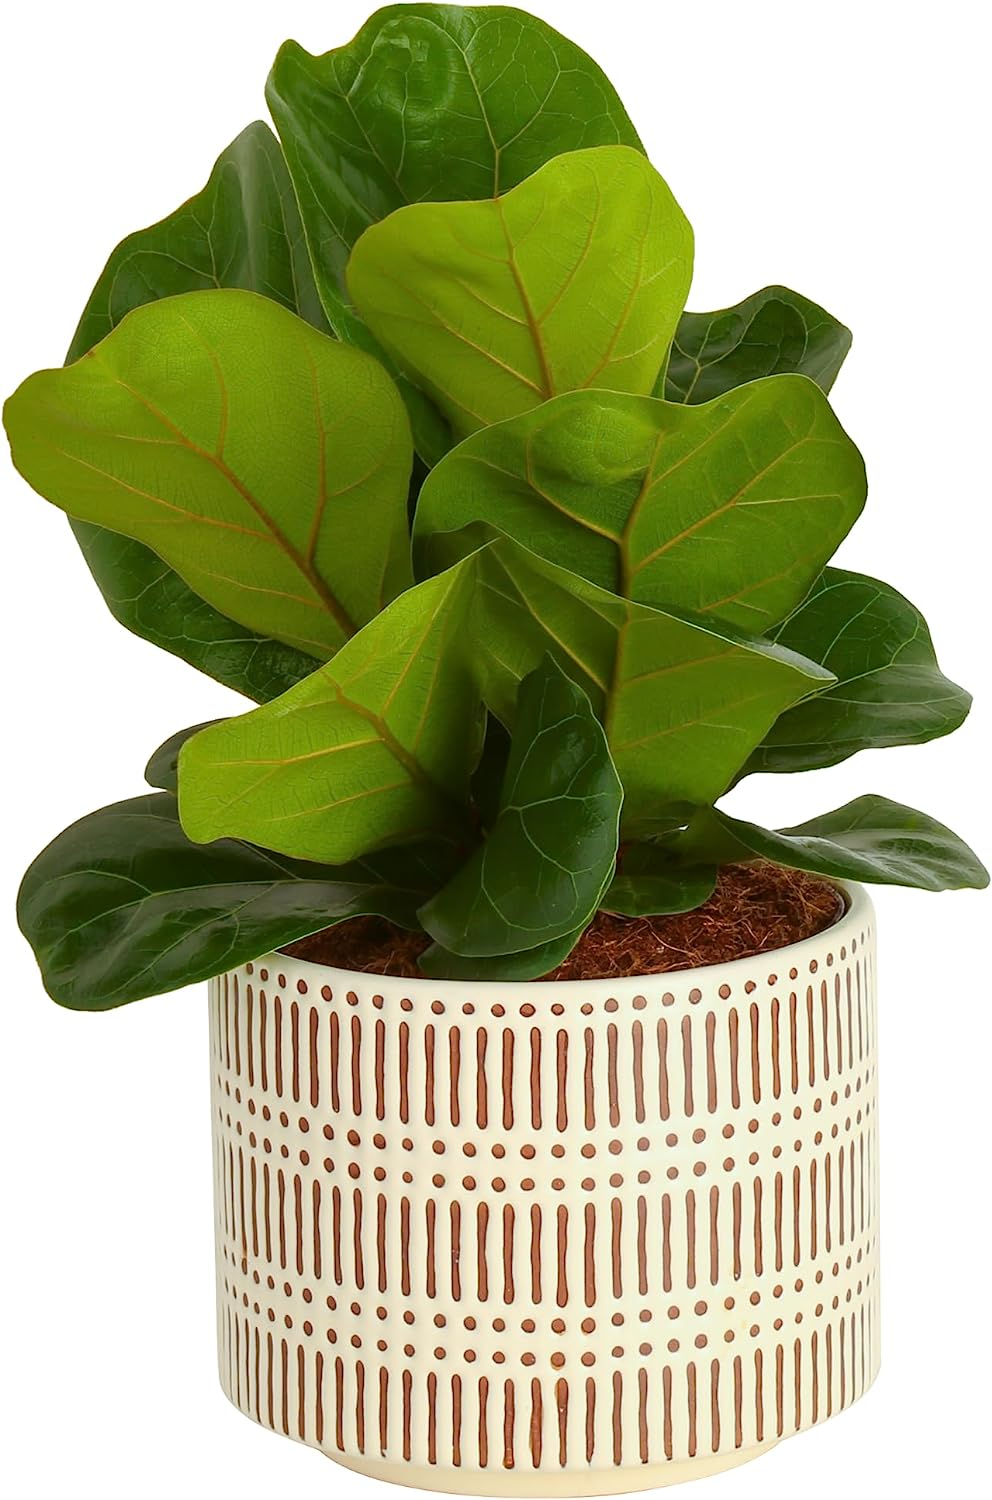 Prime Members: 1-2 Ft Costa Farms Fiddle Leaf Fig Tree Live Plant $24.33